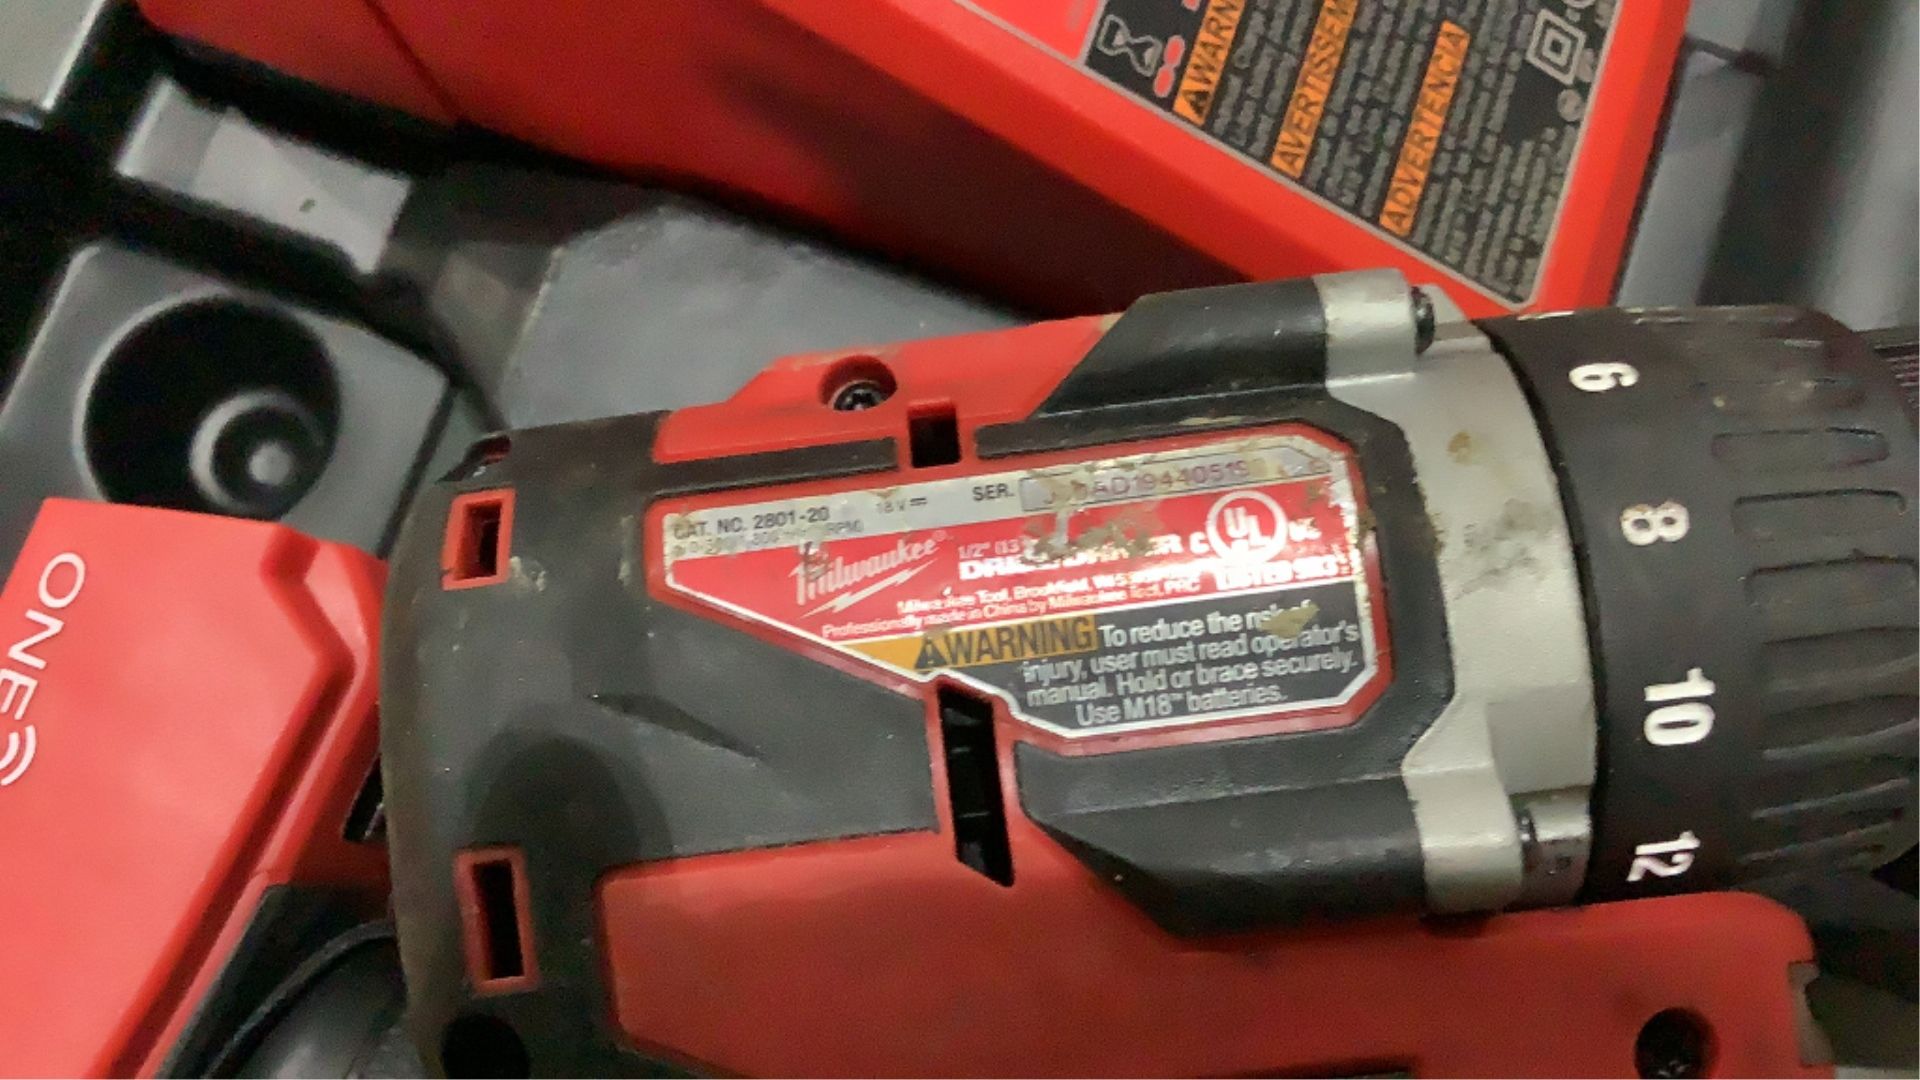 Milwaukee 1/4" Impact Driver and 1/2" Drill/Driver - Image 10 of 12